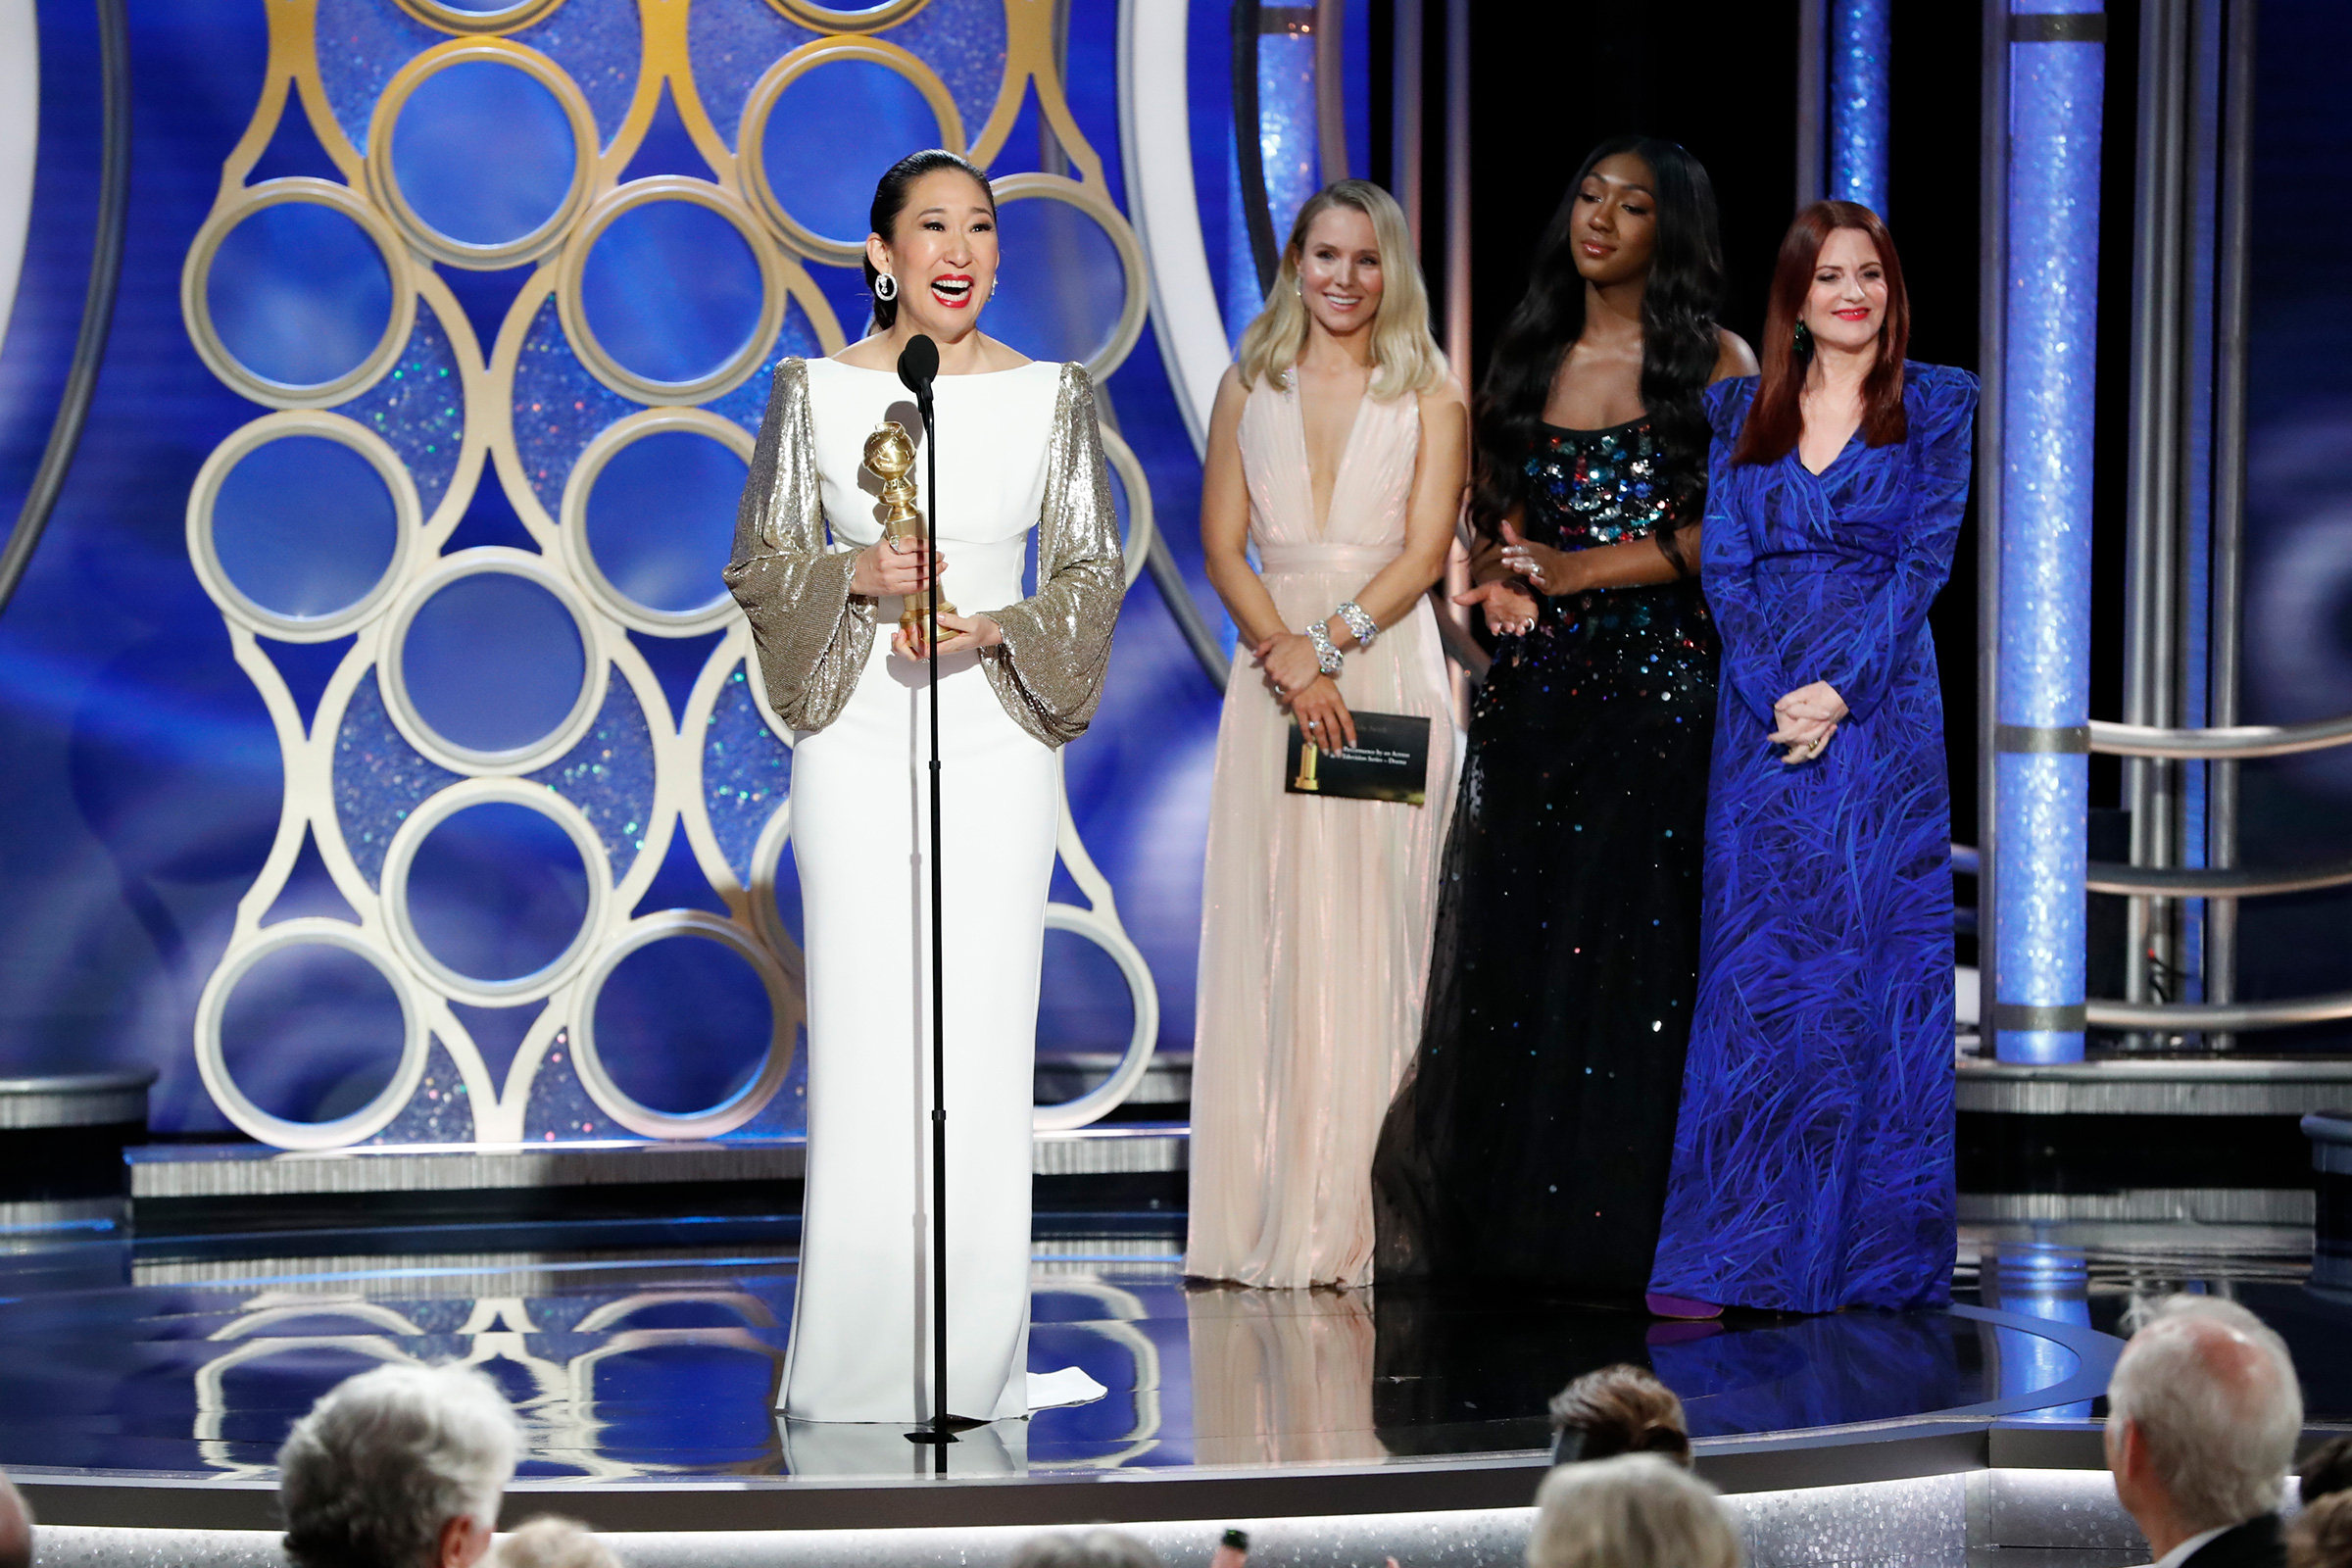 Sandra Oh accepts the Best Performance by an Actress in a Television Series Drama award during the 76th Annual Golden Globe Awards on Jan. 6, 2019.